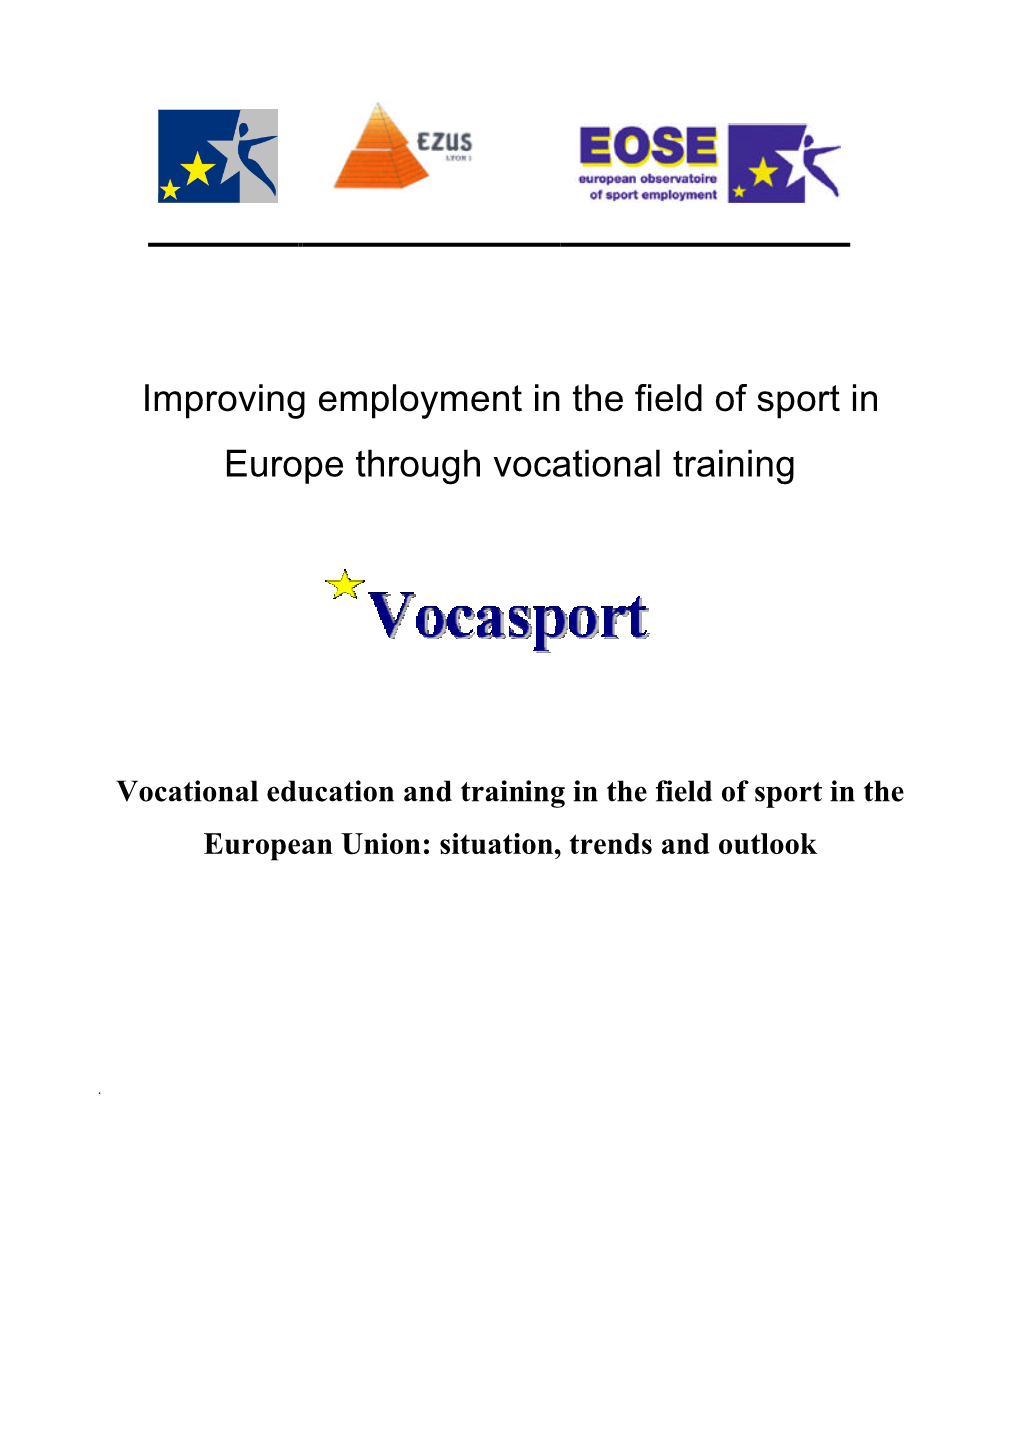 Improving Employment in the Field of Sport in Europe Through Vocational Training